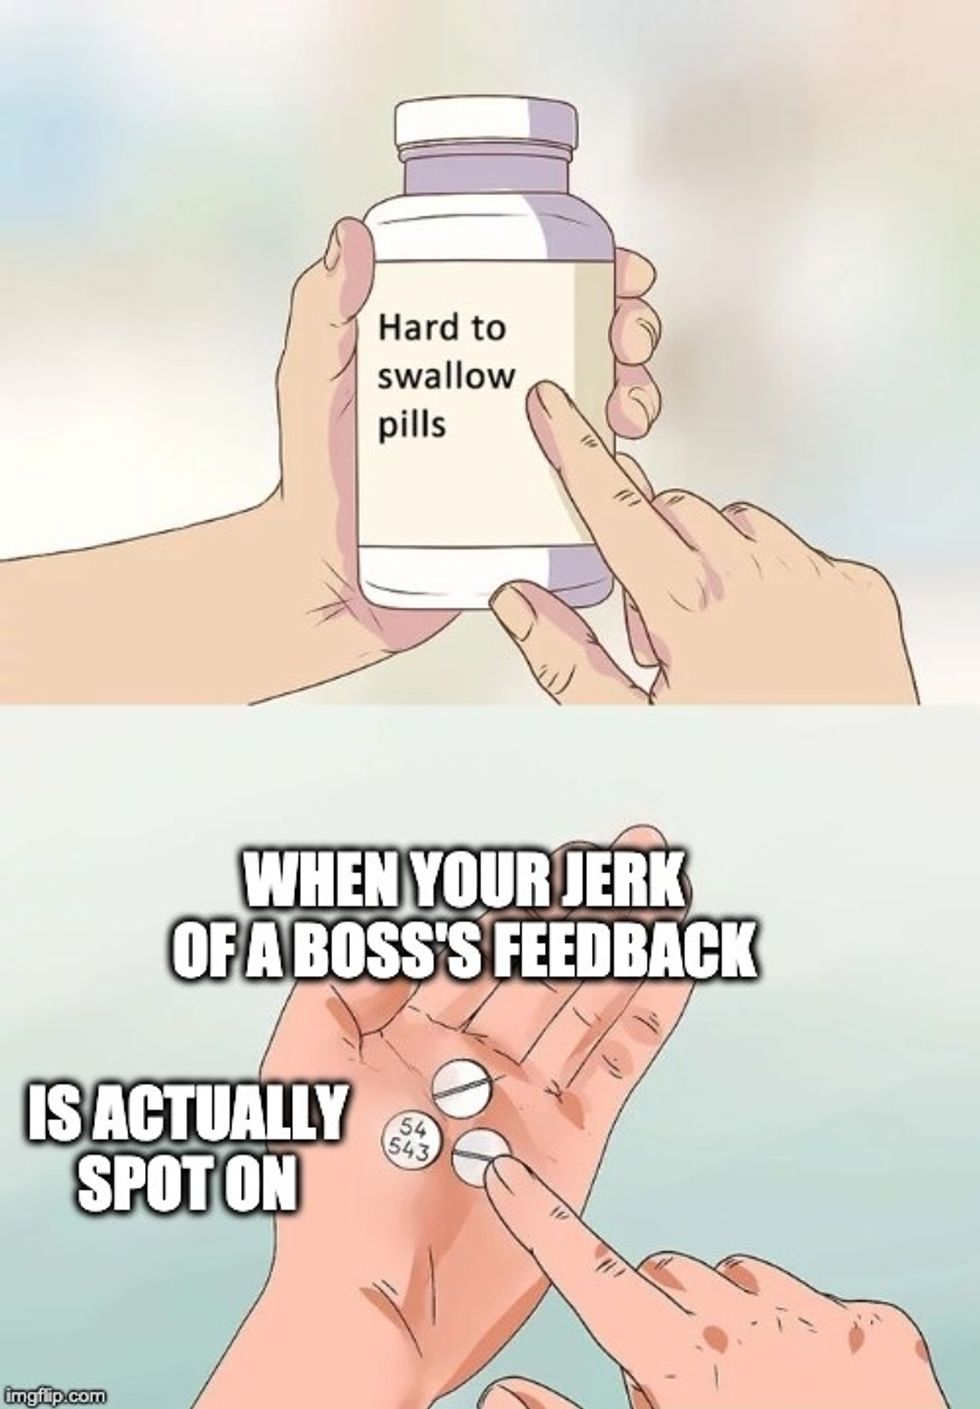 Hard To Swallow Pills boss meme: When Your Jerk of a Boss's Feedback Is Actually Spot On